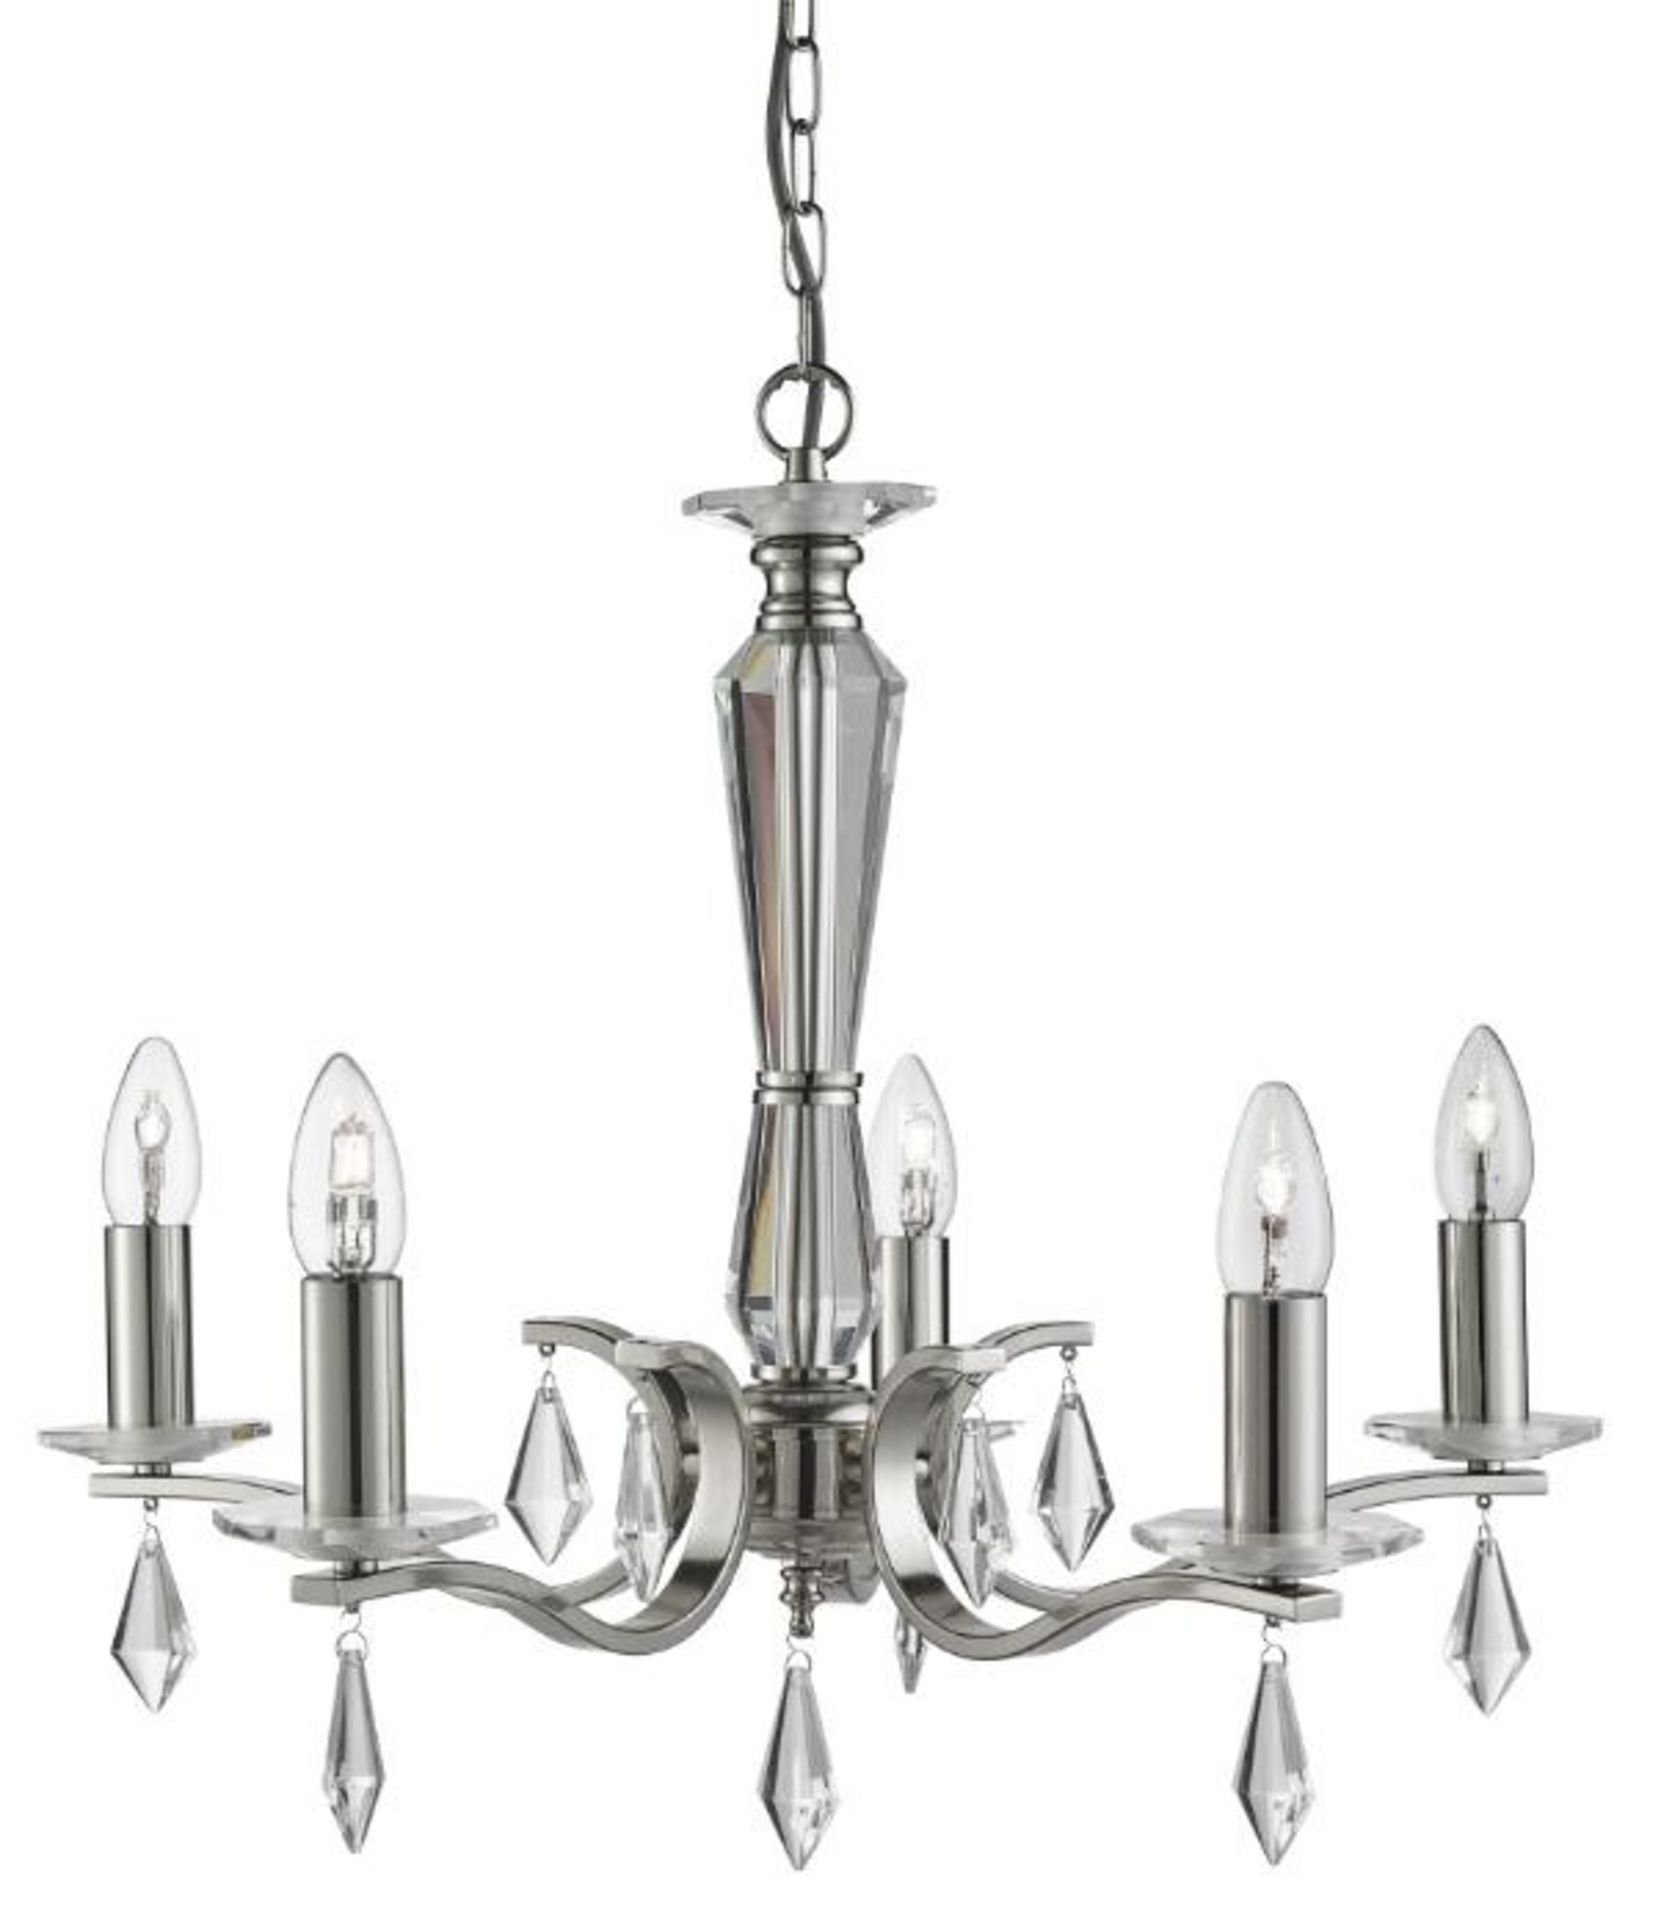 1 x Royale Satin Silver Metal 5-Light Ceiling Fitting With Hexagonal Glass Sconces - New Boxed Stock